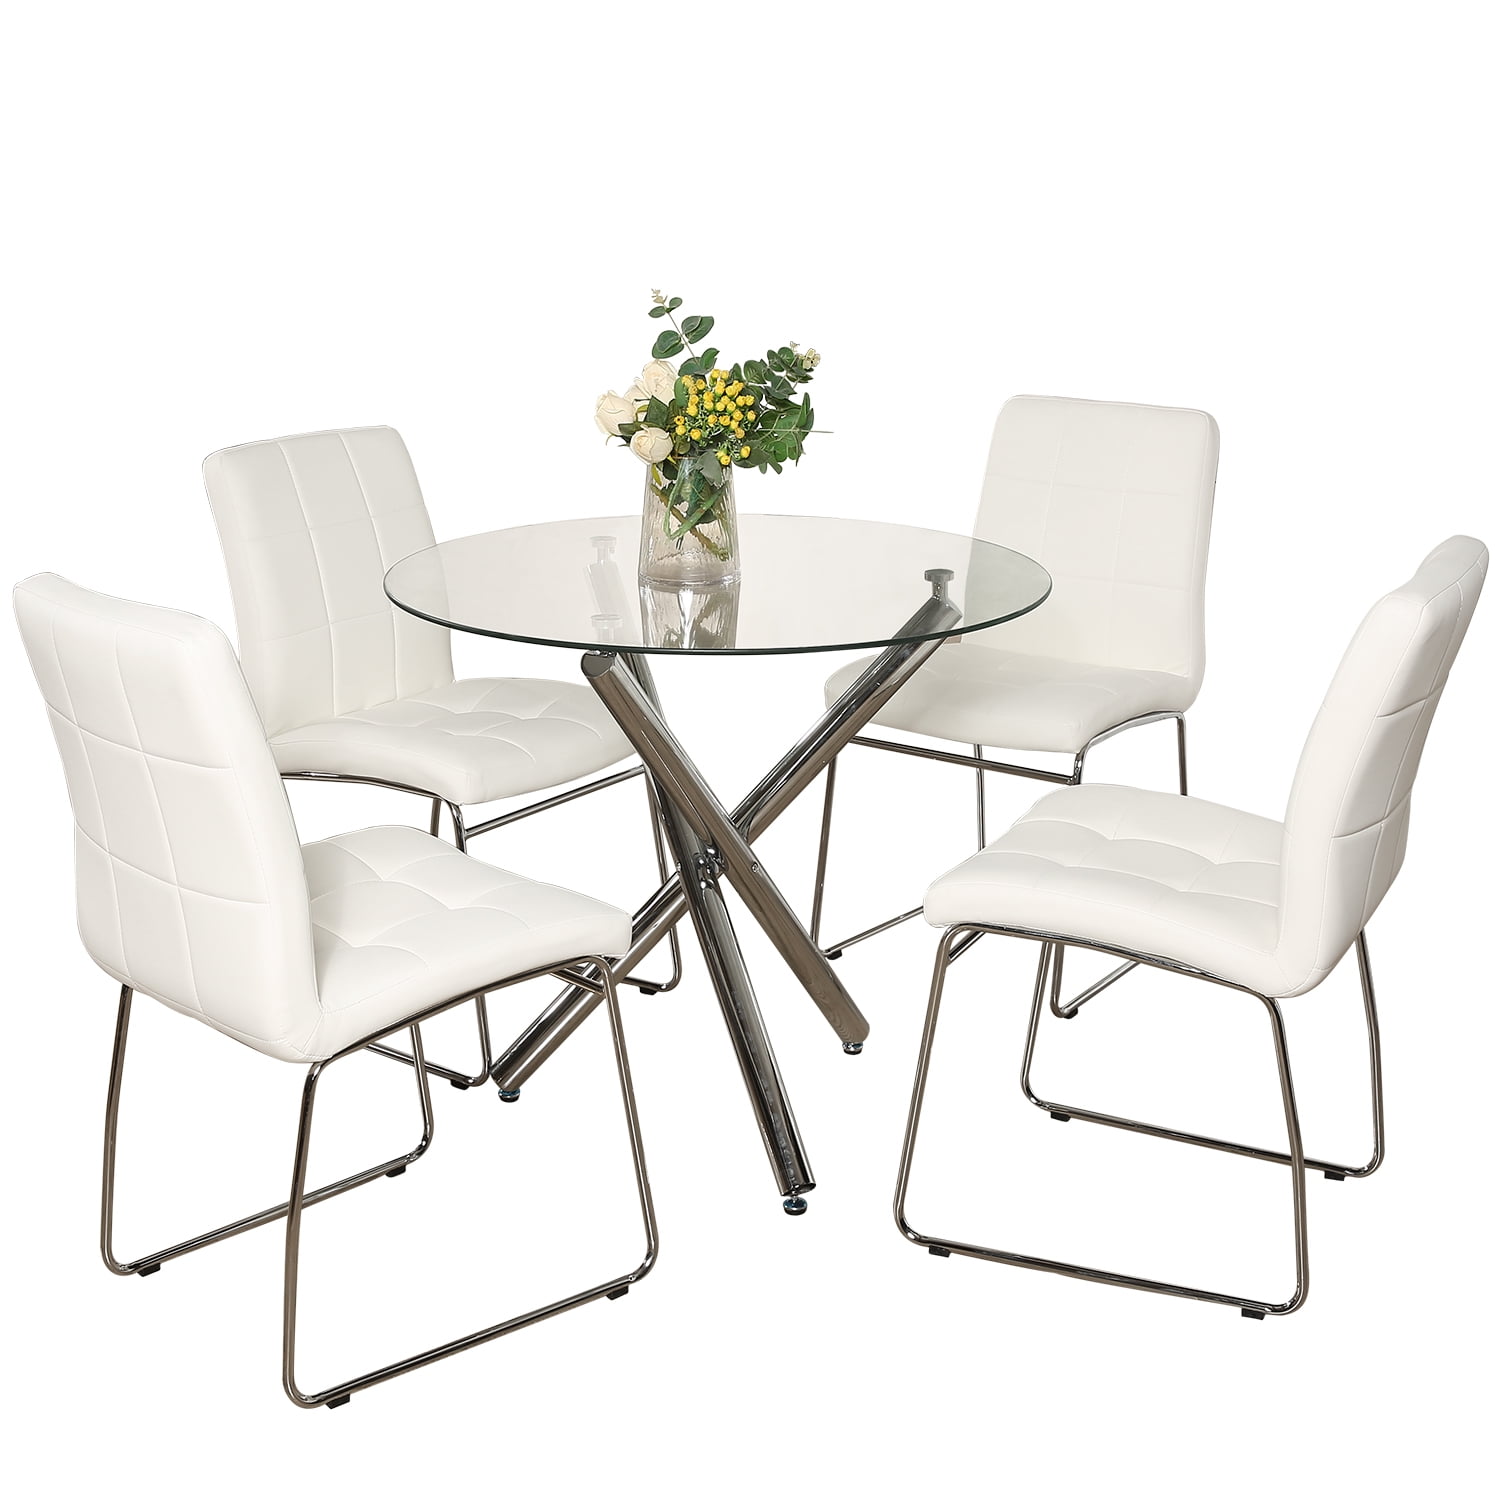 Tempered Glass Kitchen Dining Table, White Round Kitchen Table With Chairs